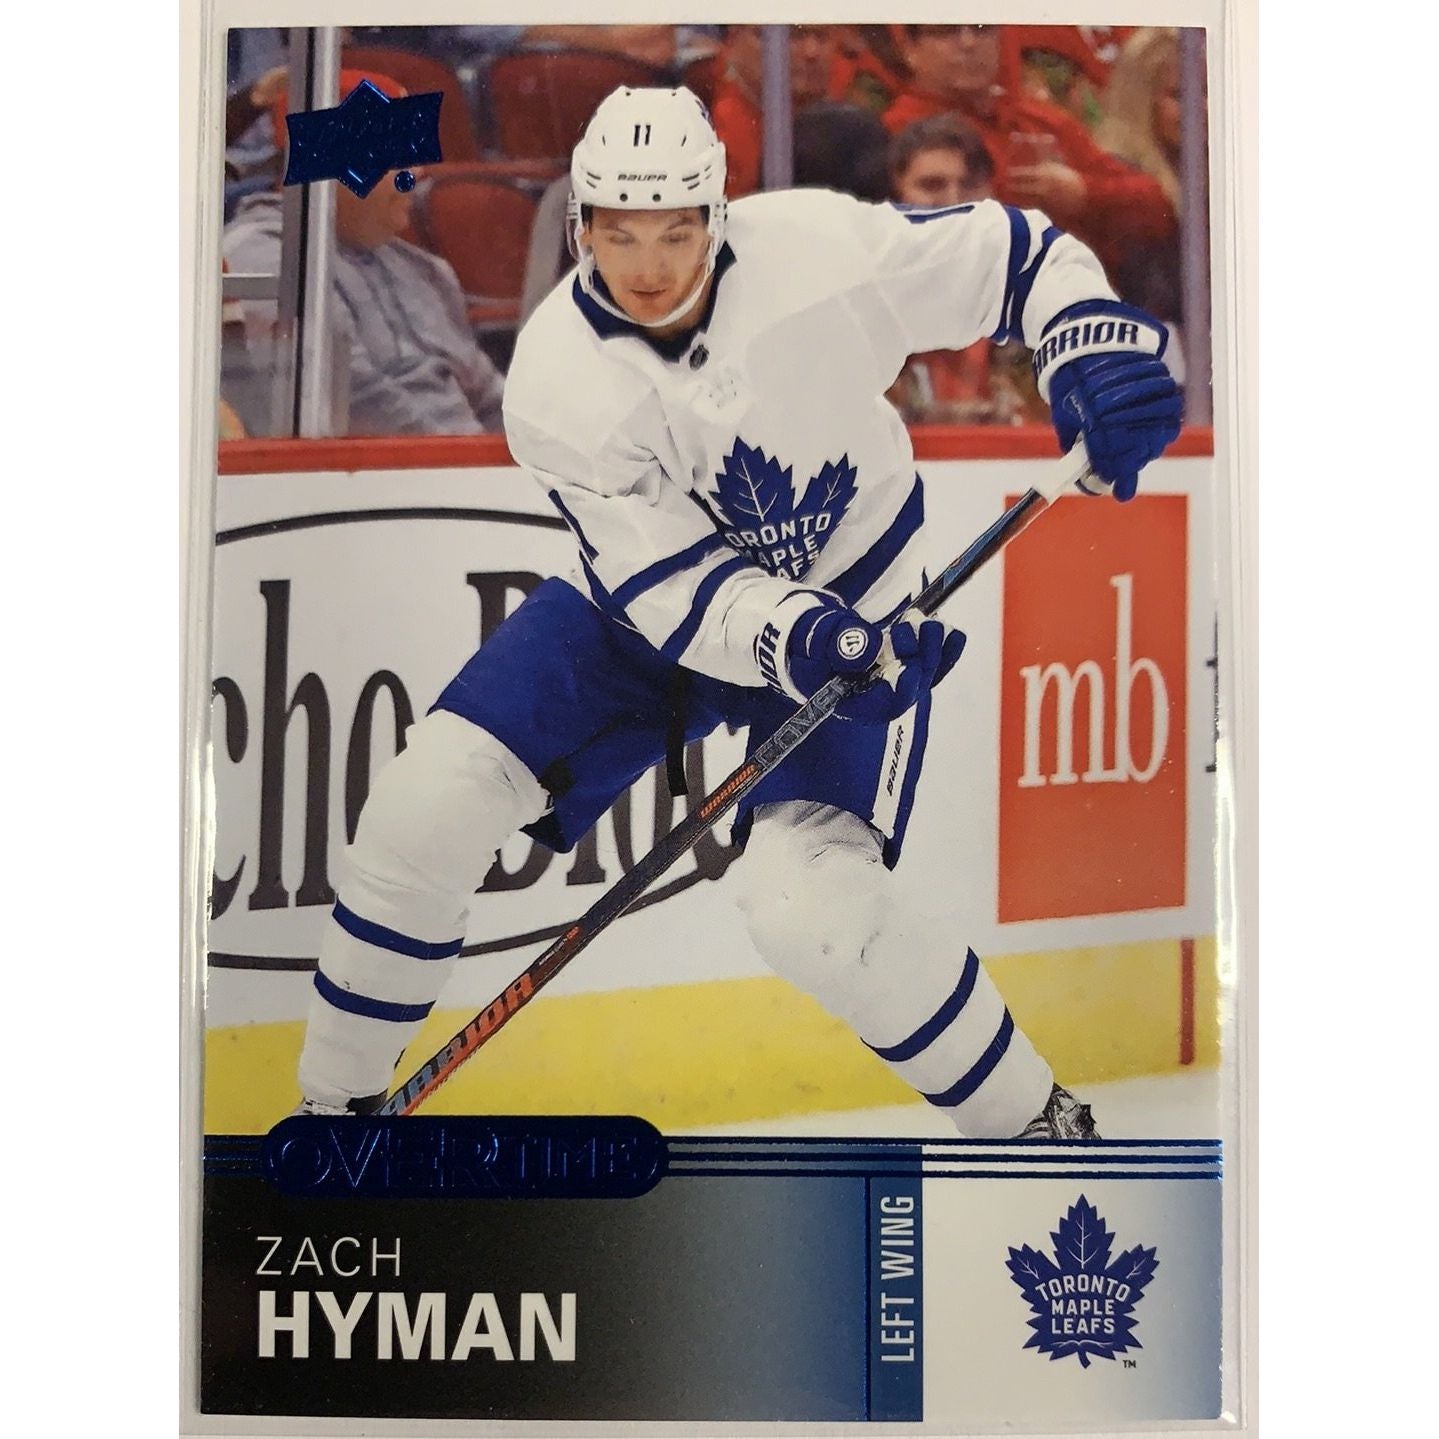  2019-20 Overtime Zach Hyman Blue Parallel  Local Legends Cards & Collectibles